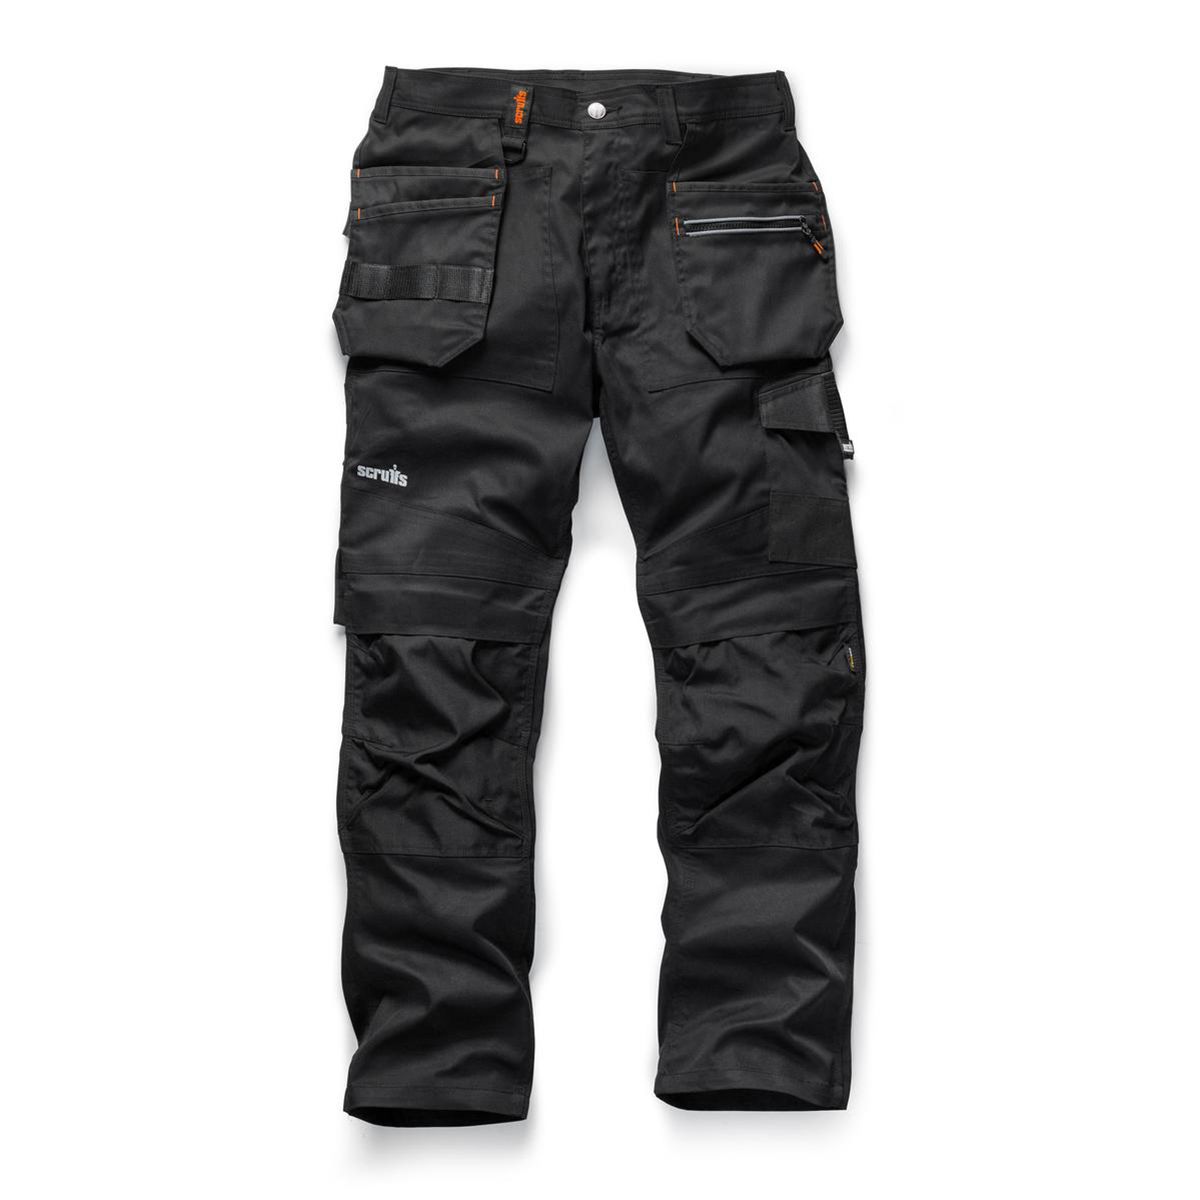 Scruffs Trade Black Men's Cotton, Polyester Trousers 28in